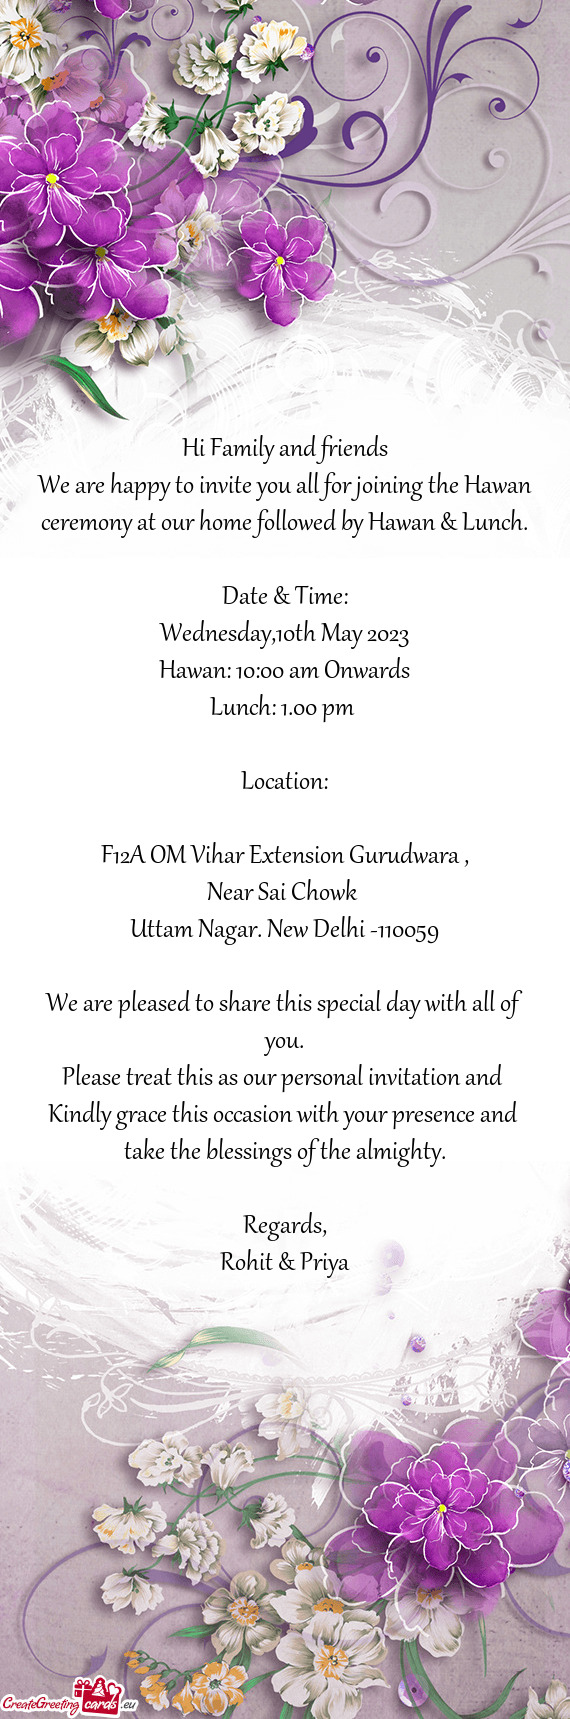 We are happy to invite you all for joining the Hawan ceremony at our home followed by Hawan & Lunch